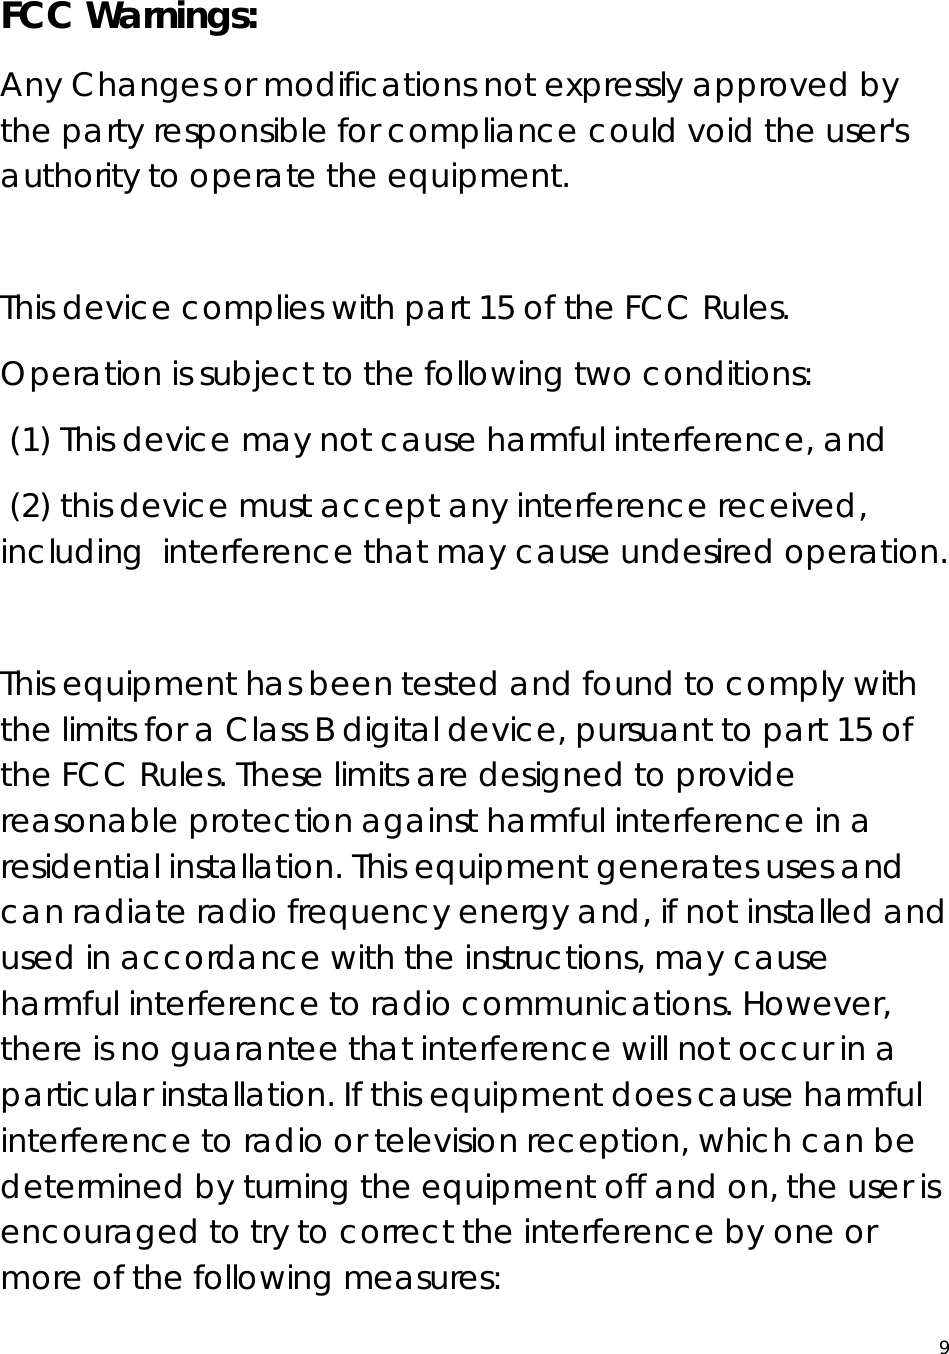  9 FCC Warnings: Any Changes or modifications not expressly approved by the party responsible for compliance could void the user&apos;s authority to operate the equipment.     This device complies with part 15 of the FCC Rules.  Operation is subject to the following two conditions:   (1) This device may not cause harmful interference, and   (2) this device must accept any interference received, including  interference that may cause undesired operation.      This equipment has been tested and found to comply with the limits for a Class B digital device, pursuant to part 15 of the FCC Rules. These limits are designed to provide reasonable protection against harmful interference in a residential installation. This equipment generates uses and can radiate radio frequency energy and, if not installed and used in accordance with the instructions, may cause harmful interference to radio communications. However, there is no guarantee that interference will not occur in a particular installation. If this equipment does cause harmful interference to radio or television reception, which can be determined by turning the equipment off and on, the user is encouraged to try to correct the interference by one or more of the following measures:    